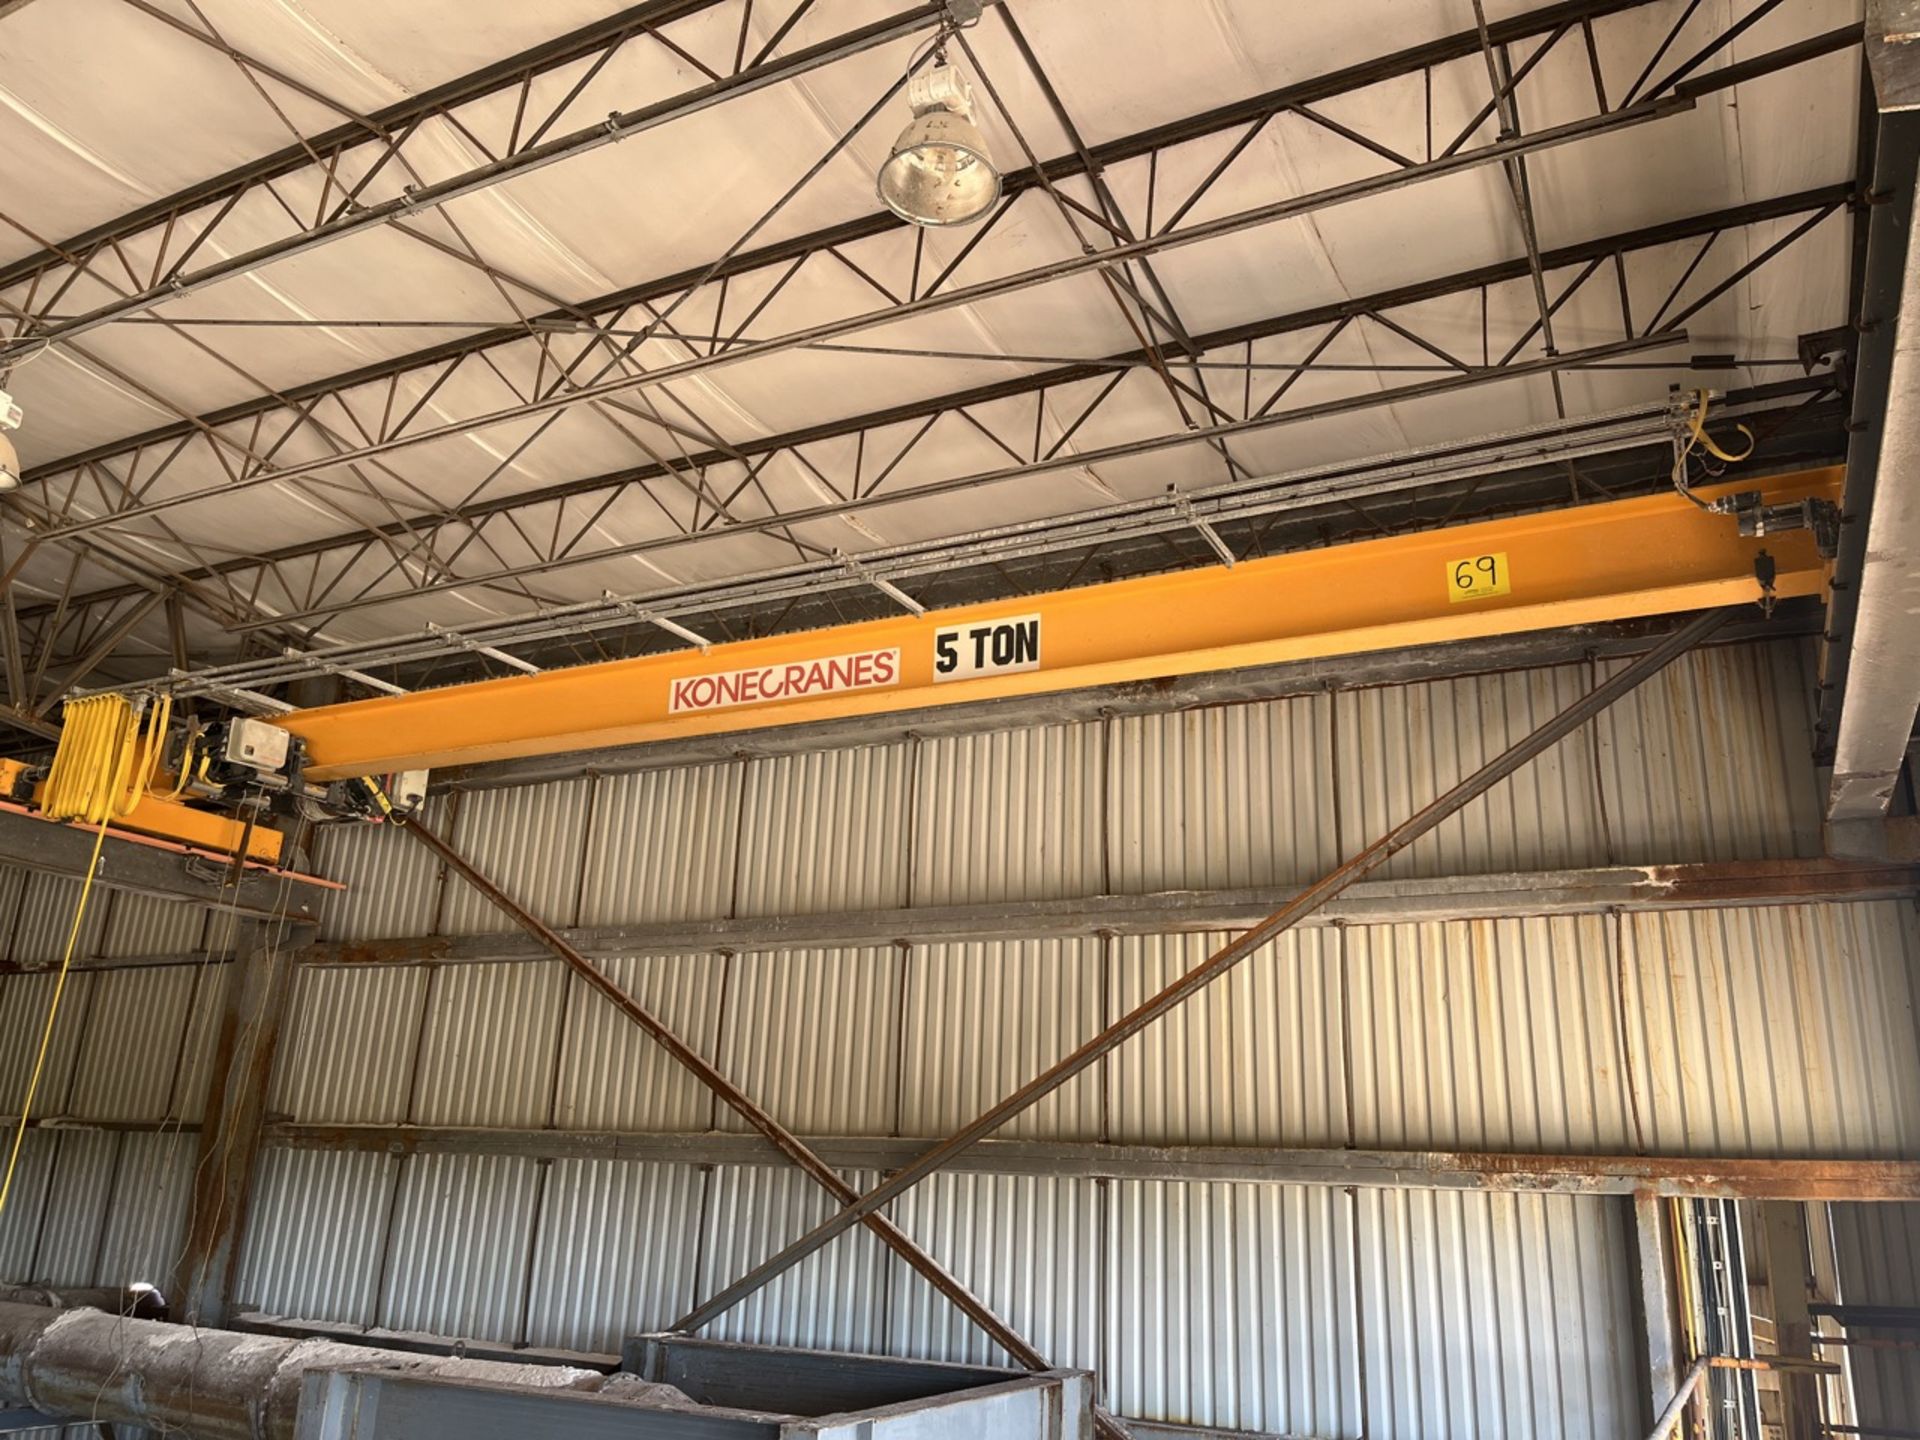 Konecranes overhead crane with a load capacity of 5 tons and a 15-meter lifting capacity; includes - Image 2 of 12